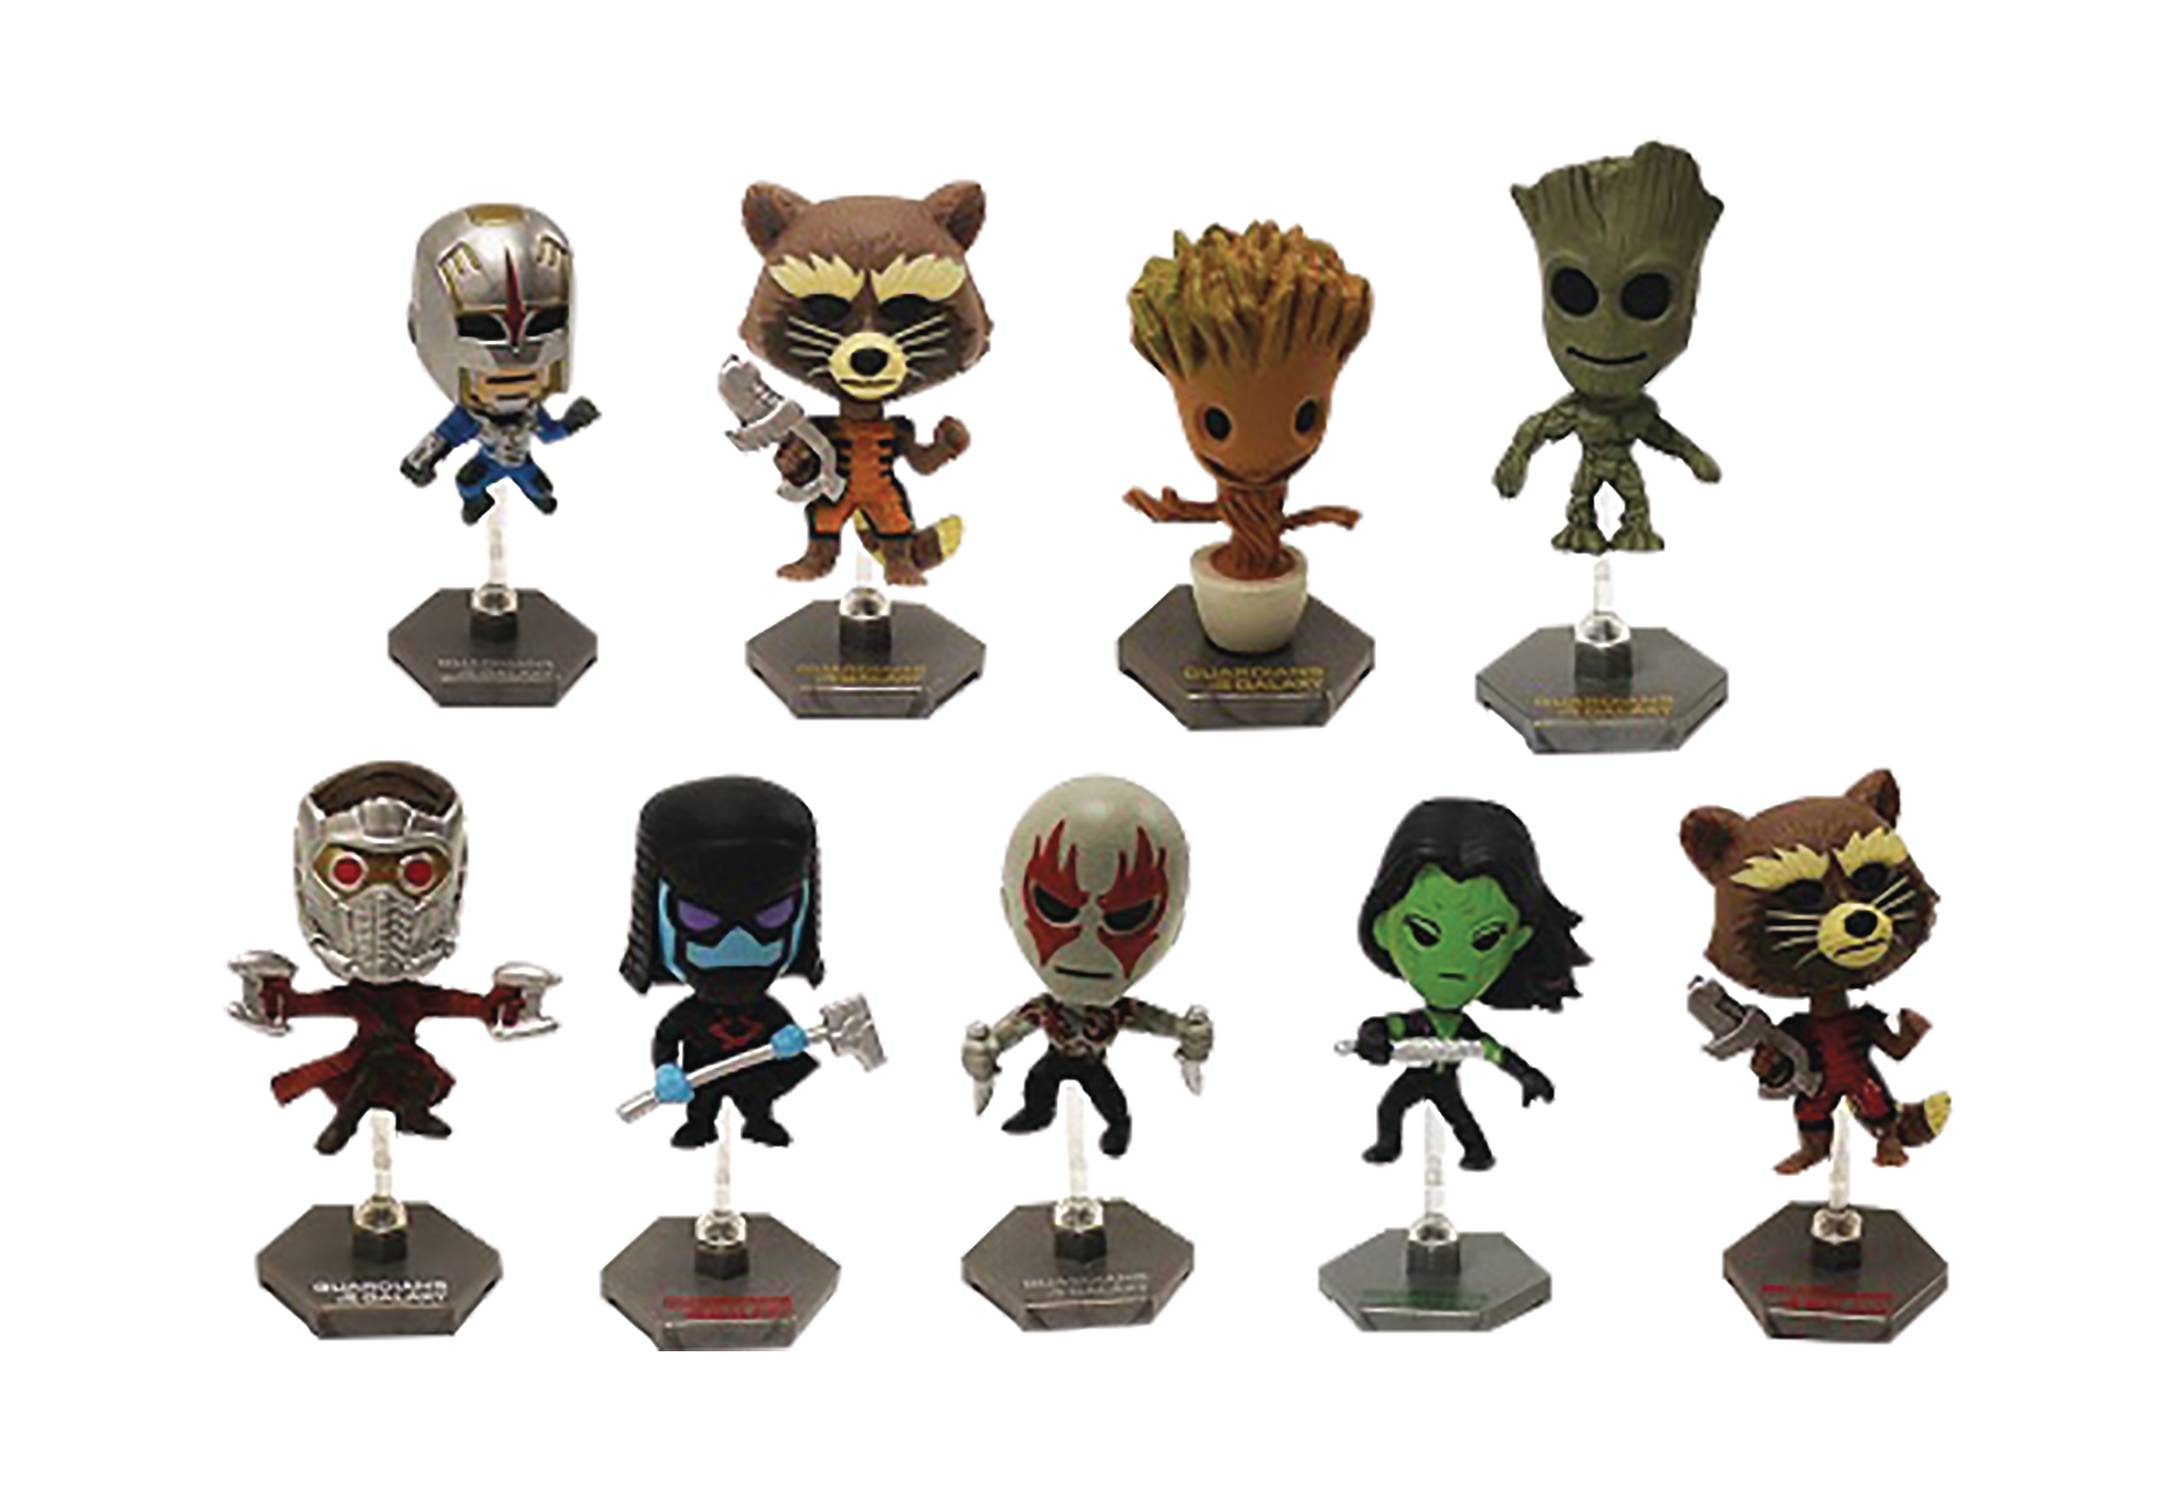 Guardians of the Galaxy Buildable Figures 24 Piece Blind Mystery Box Display (Price Is Per Figure)